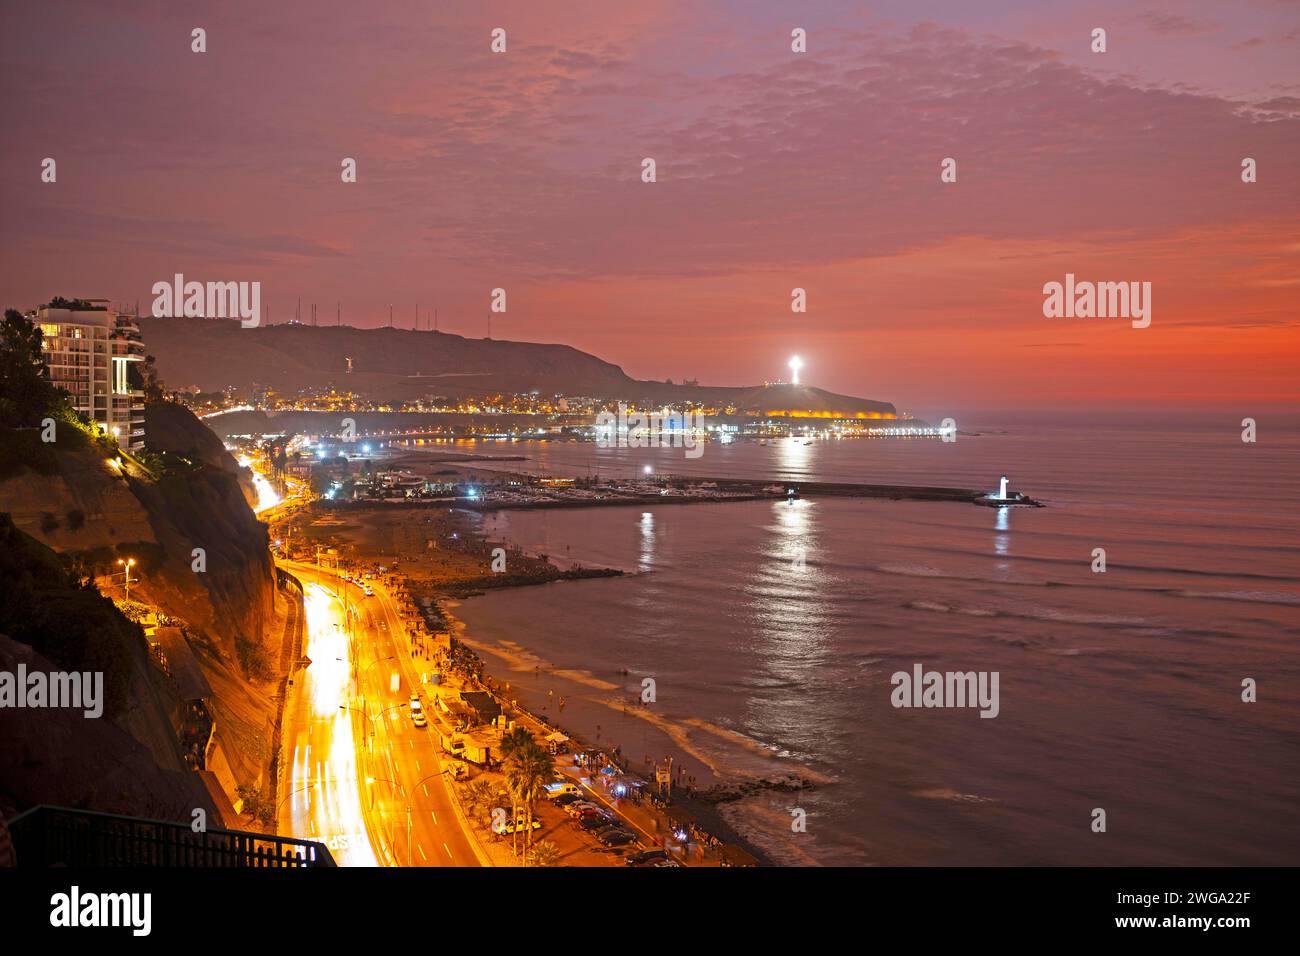 Coast in the Barranco district in the evening, Lima, Peru Stock Photo